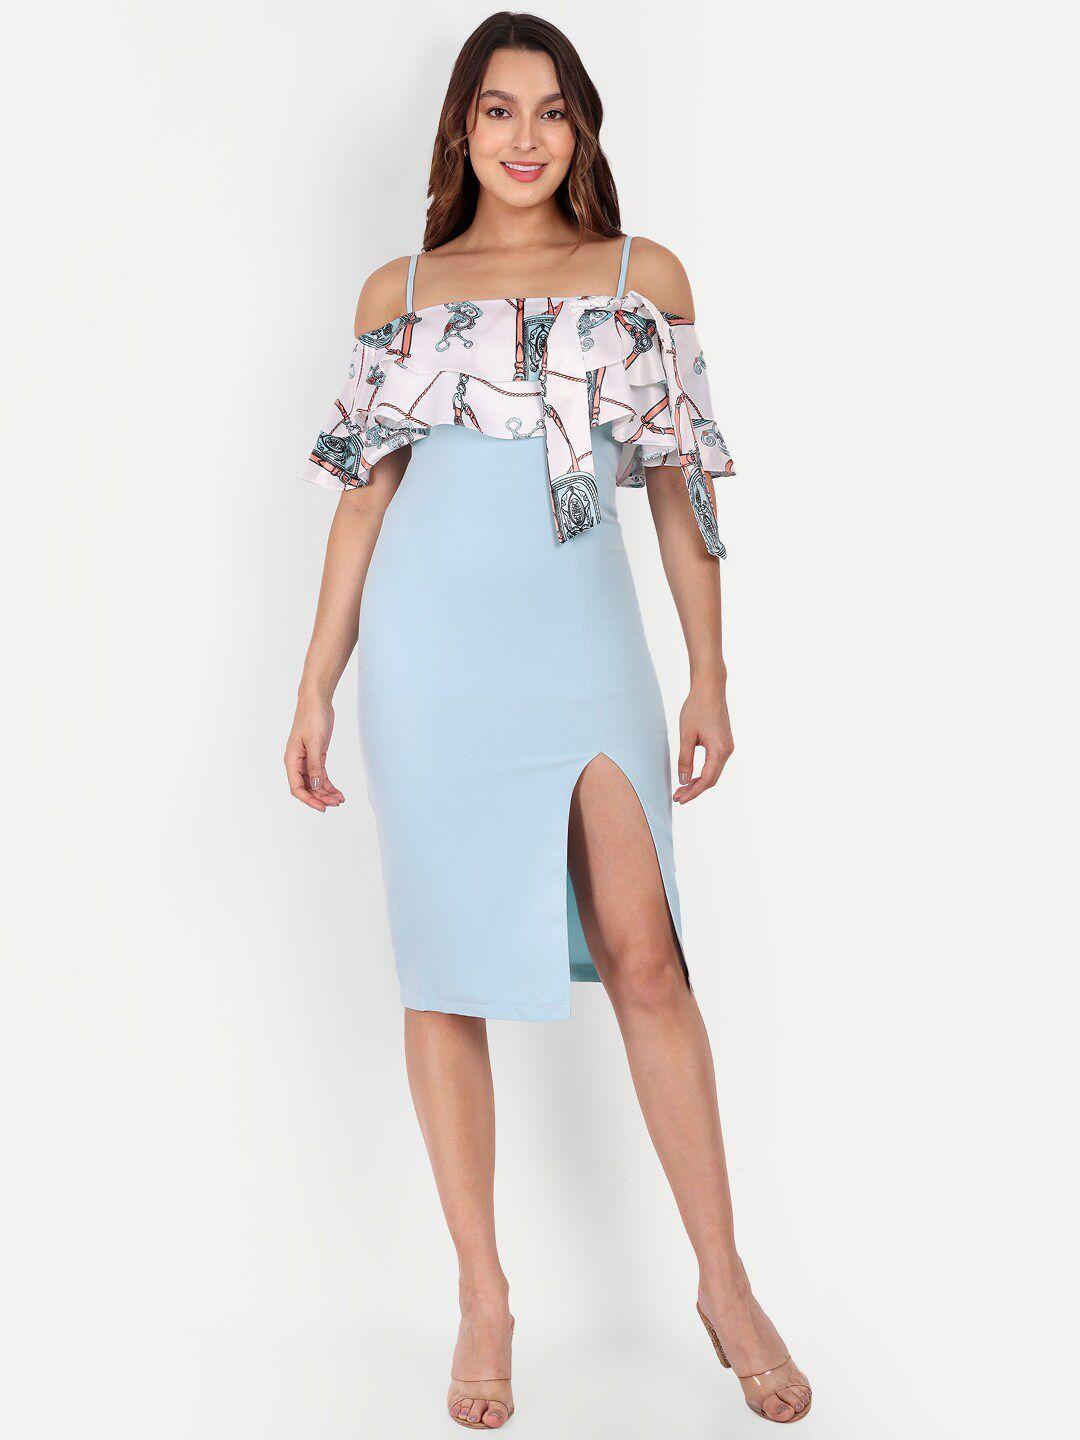 iki-chic-conversational-printed-cold-shoulder-ruffled-bodycon-dress